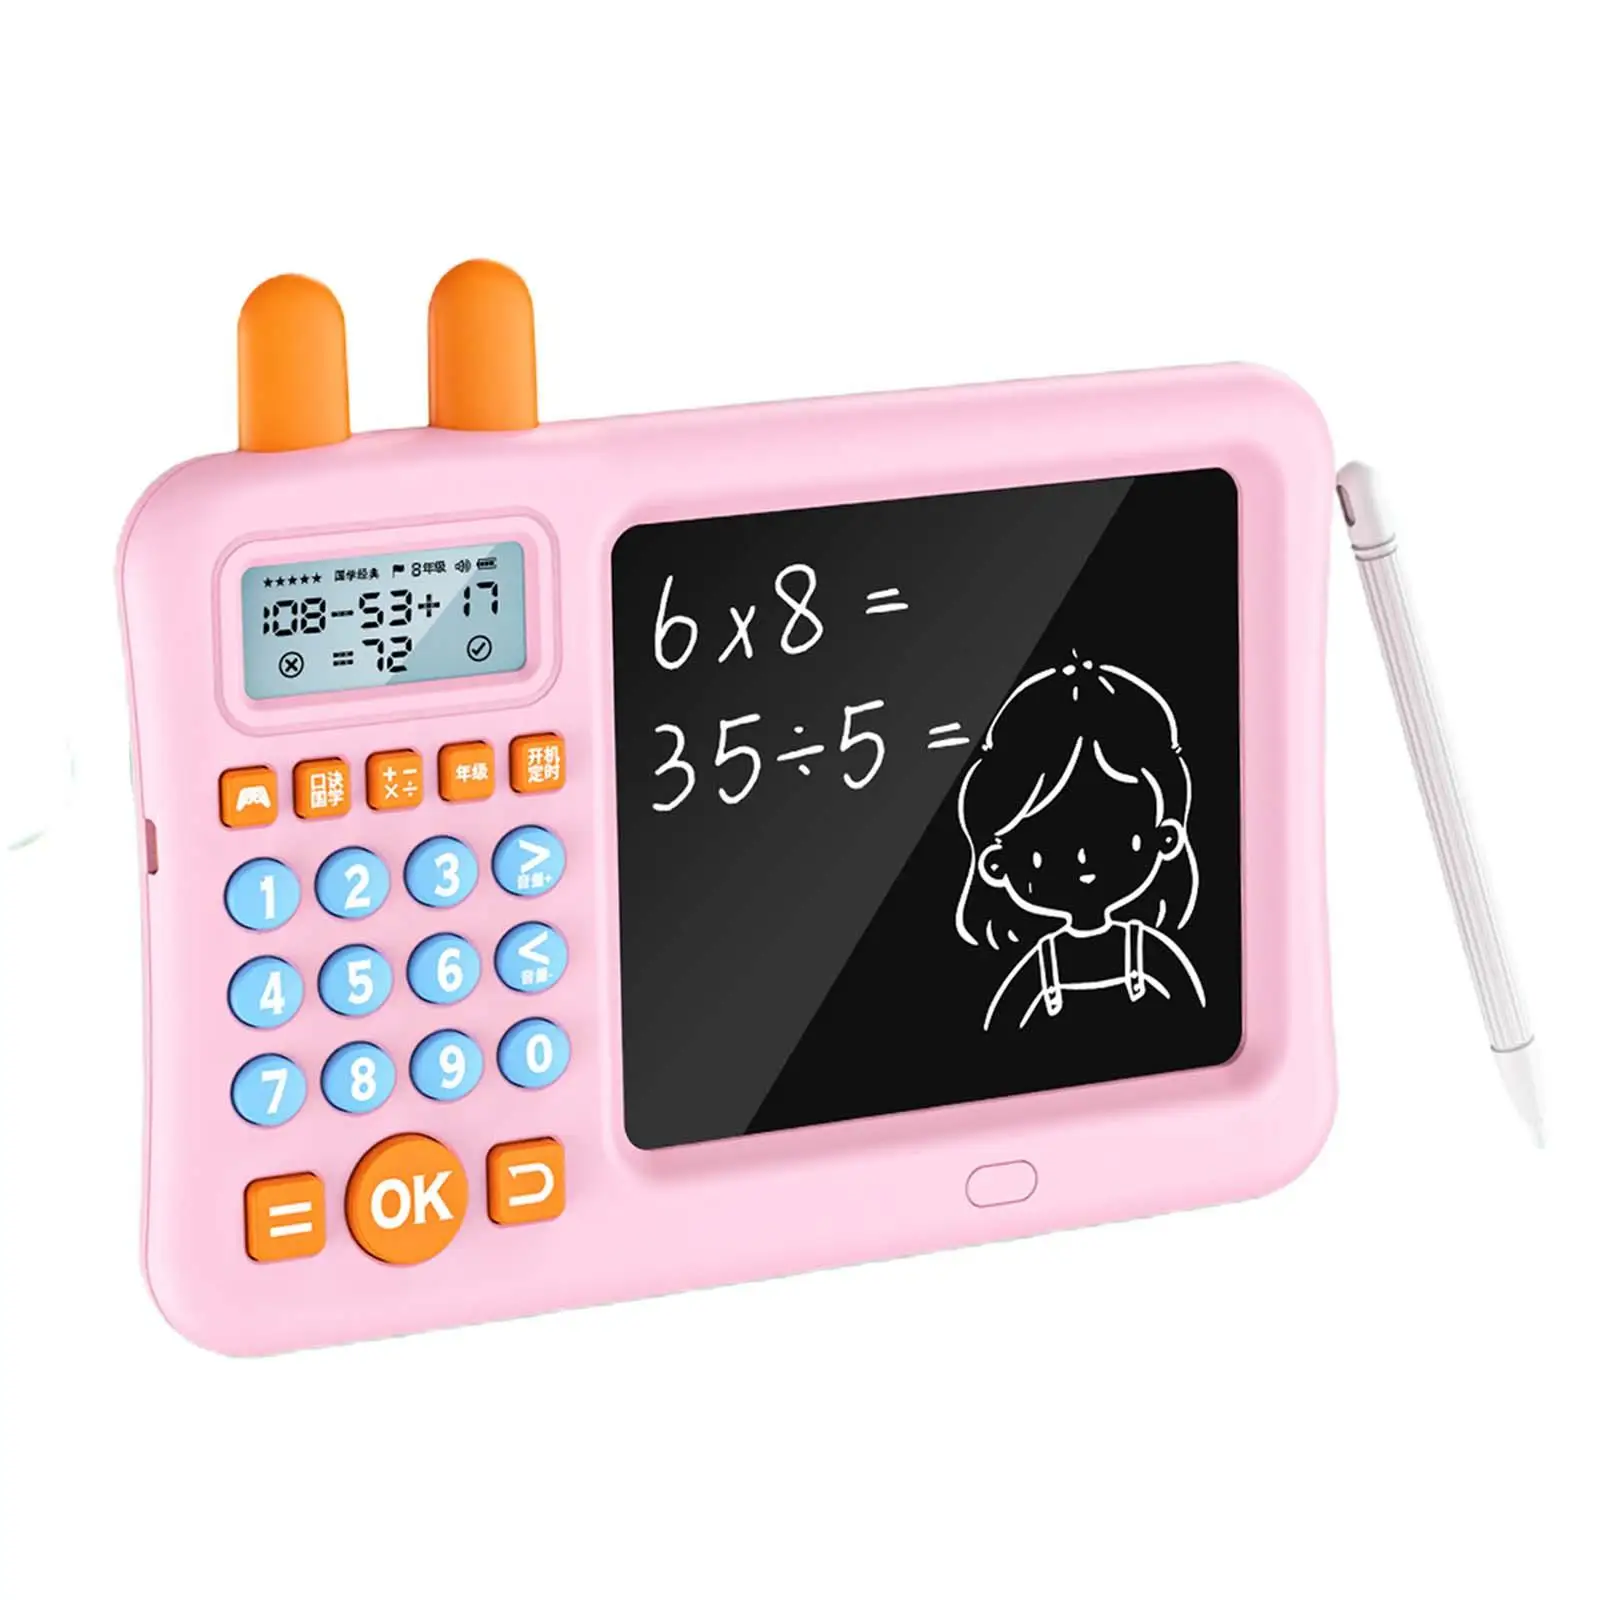 Maths Teaching Calculator Early Math Educational Toy Electronic Math Counters for Girls Students Boys Children Holiday Gifts